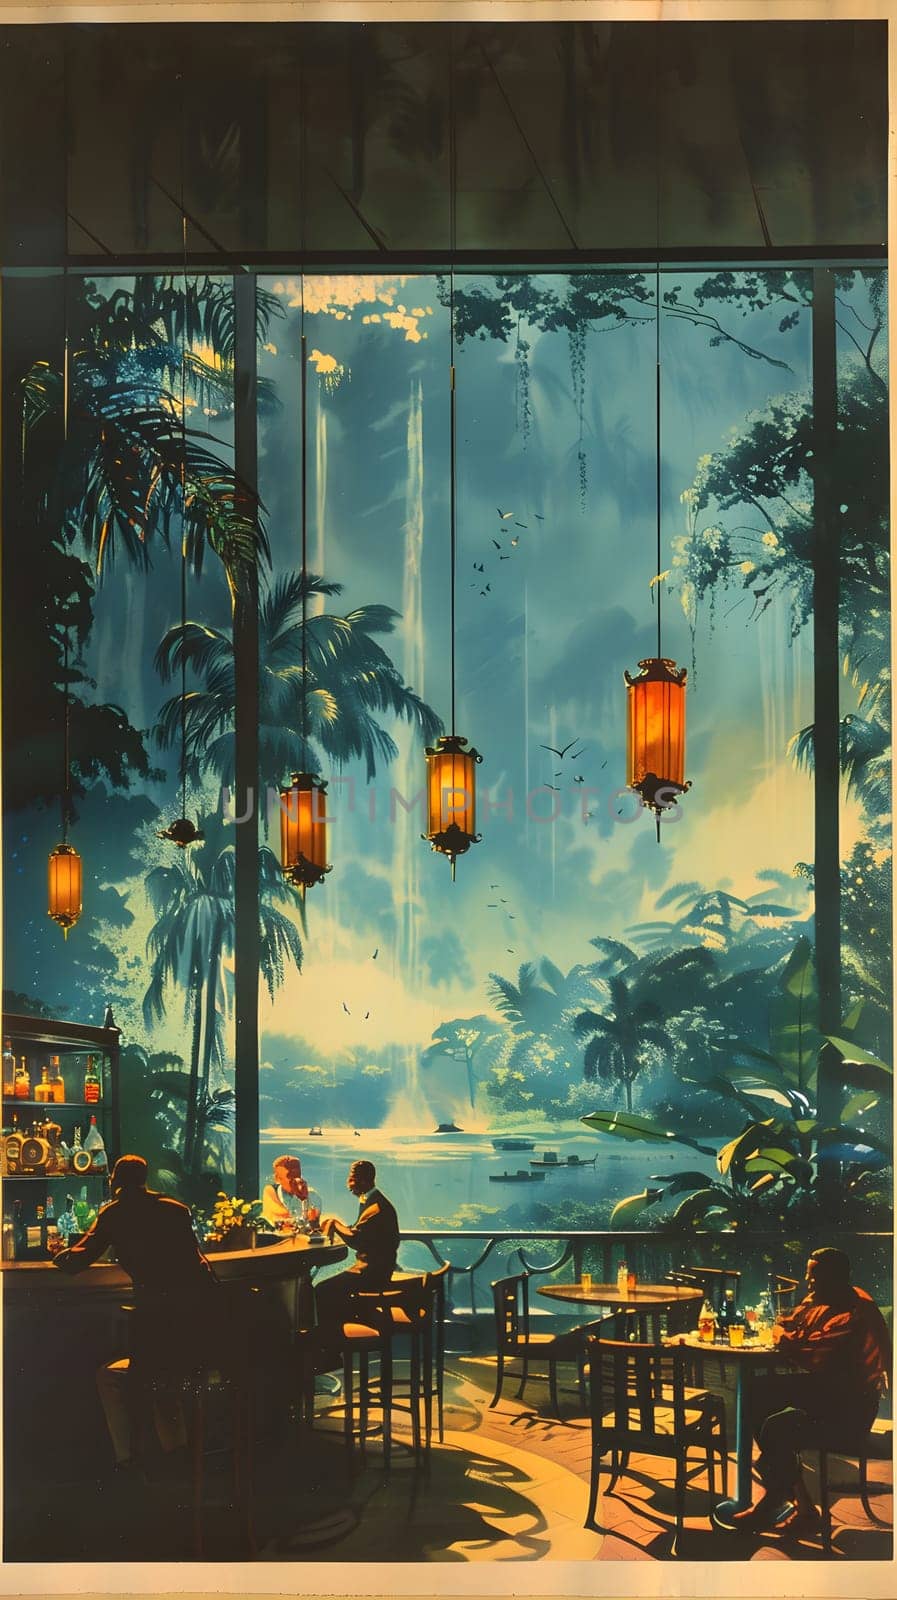 The painting depicts a cityscape at dusk with people sitting at tables in a restaurant. Tints and shades of the sky are reflected in the glass windows of the building, creating a beautiful display